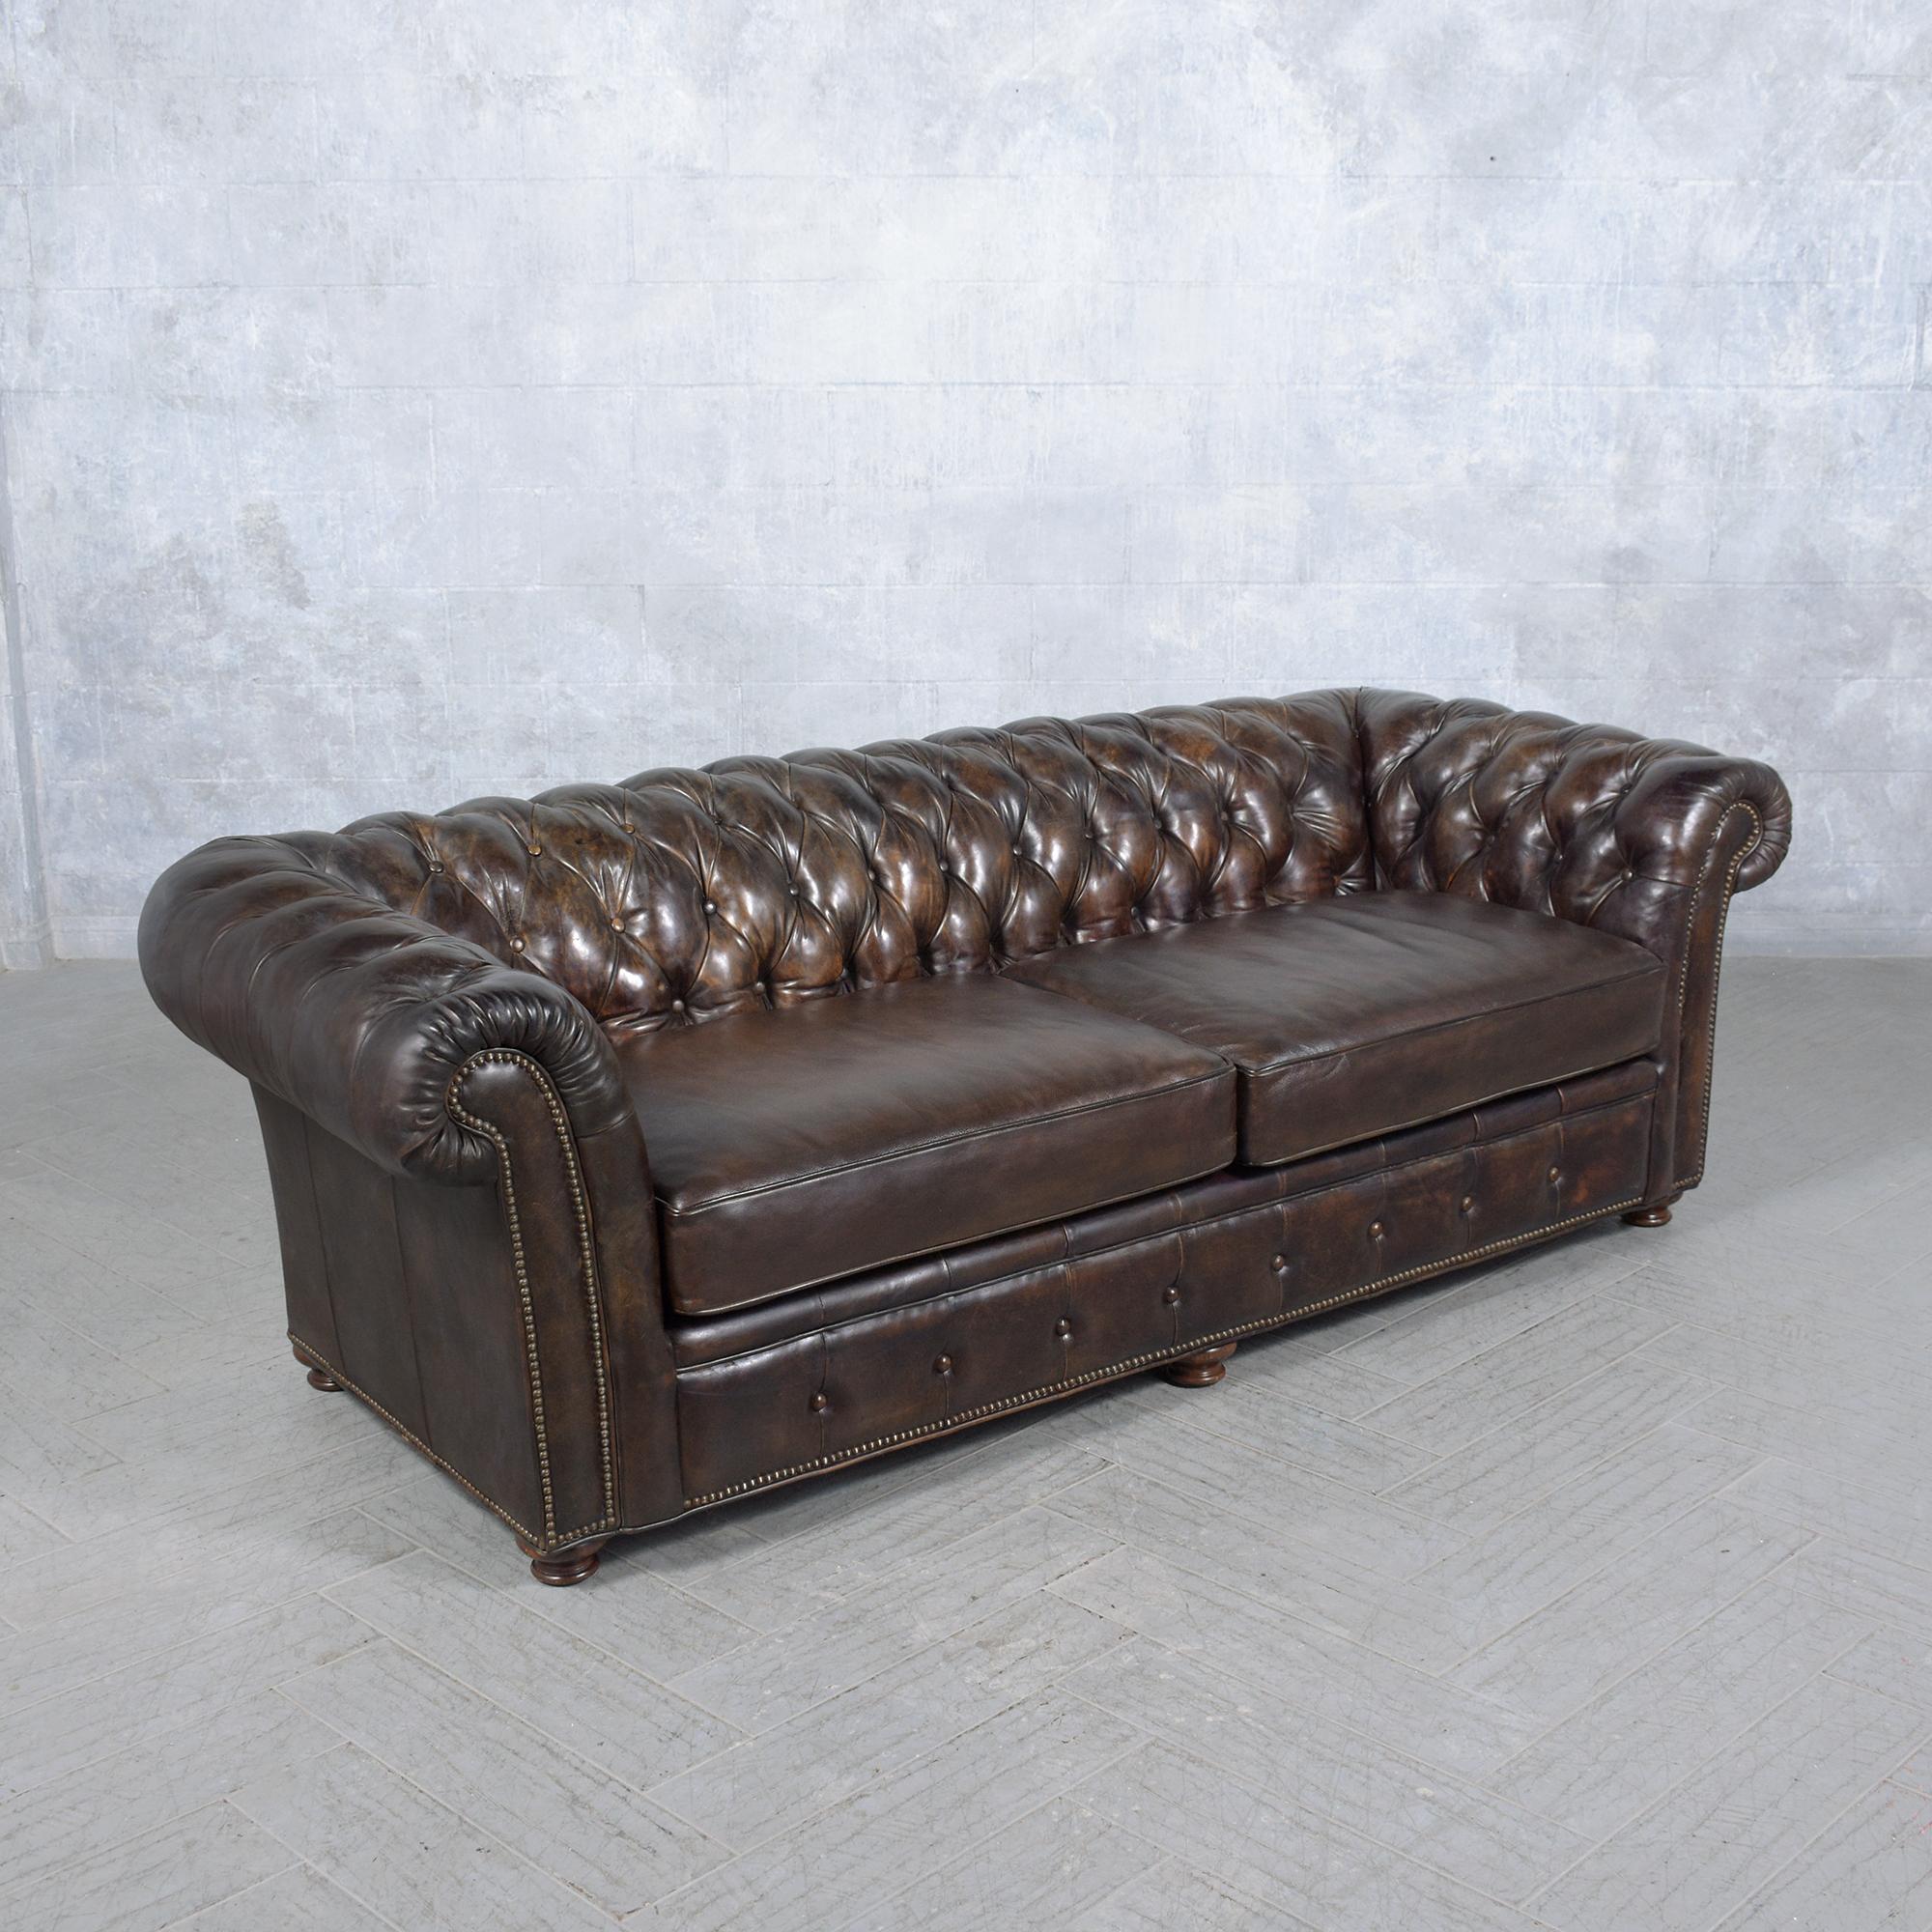 1970s Vintage Chesterfield Sofa: Brown Leather Elegance 1